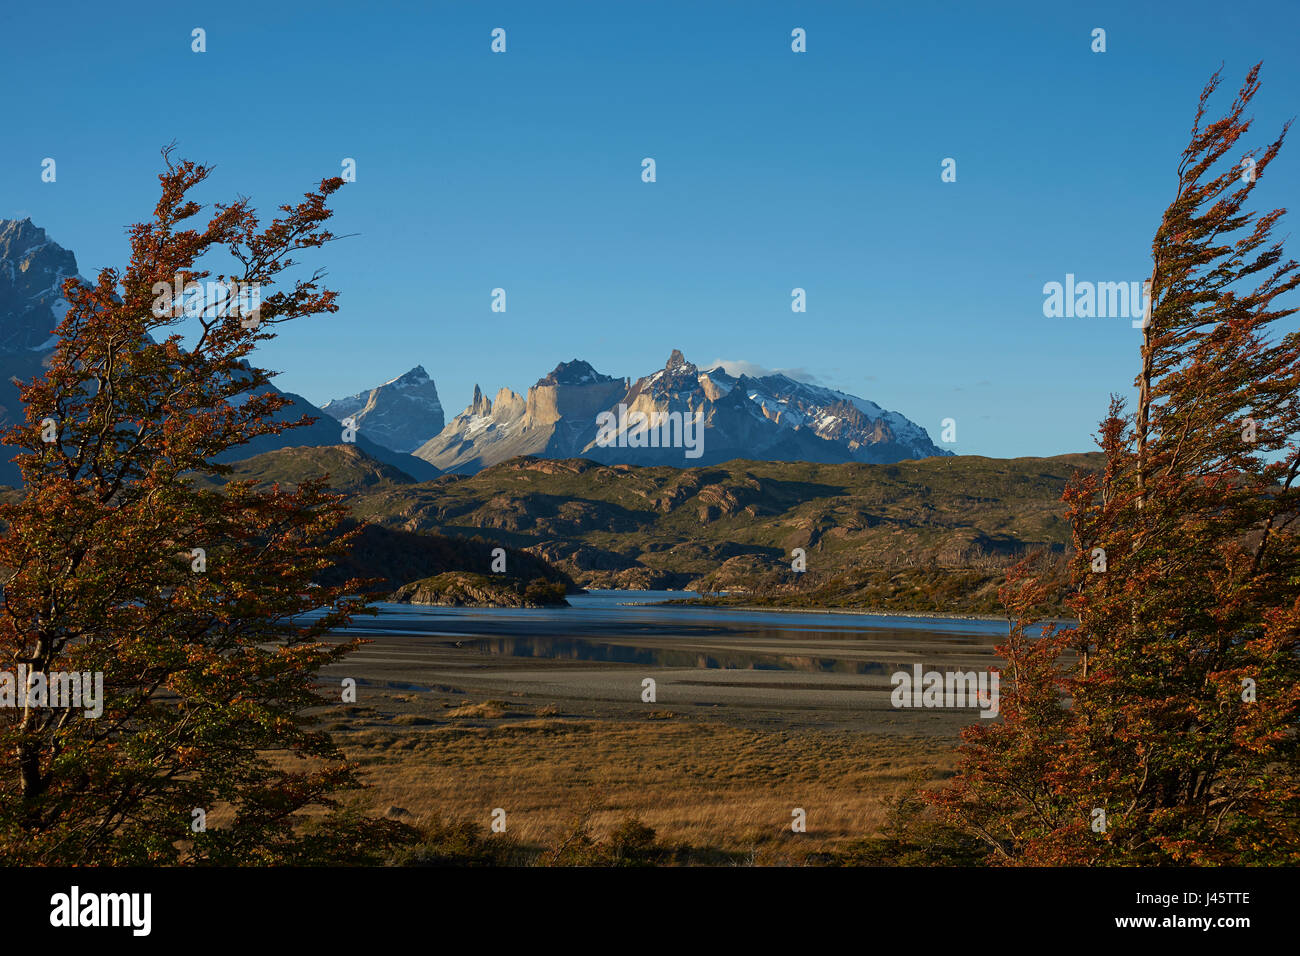 Mountain peaks of Cuernos del Paine rising above the southern end of Lago Grey in Torres del Paine National Park in Patagonia, Chile. Stock Photo